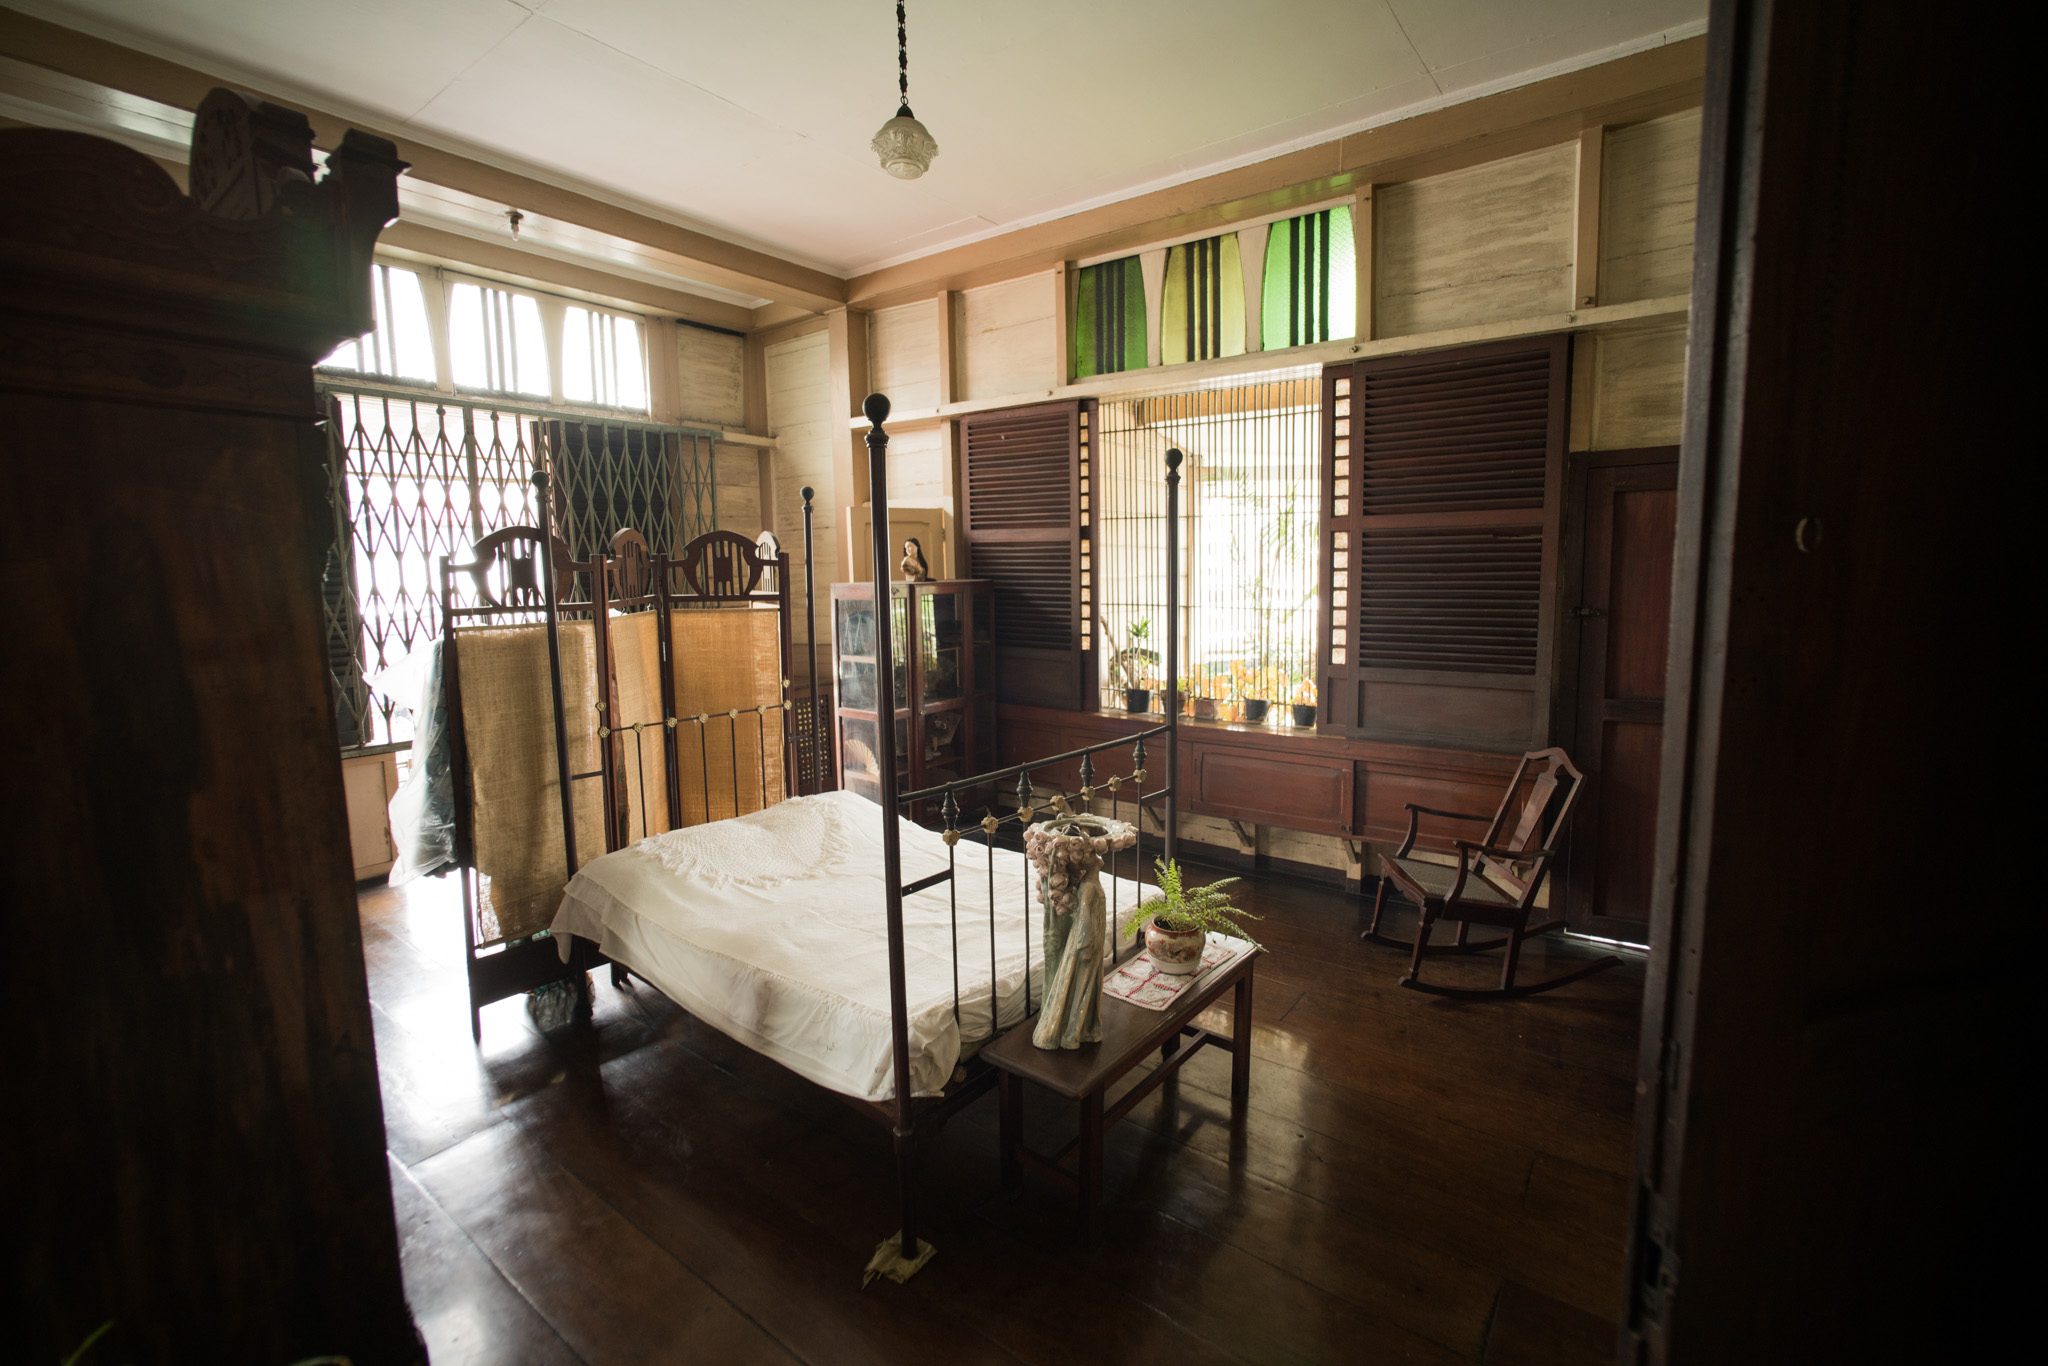 COZY. The bed shared by Gregoria de Jesus and Julio Nakpil is set up in one of the house's rooms on the third level. Photo by Martin San Diego/Rappler 